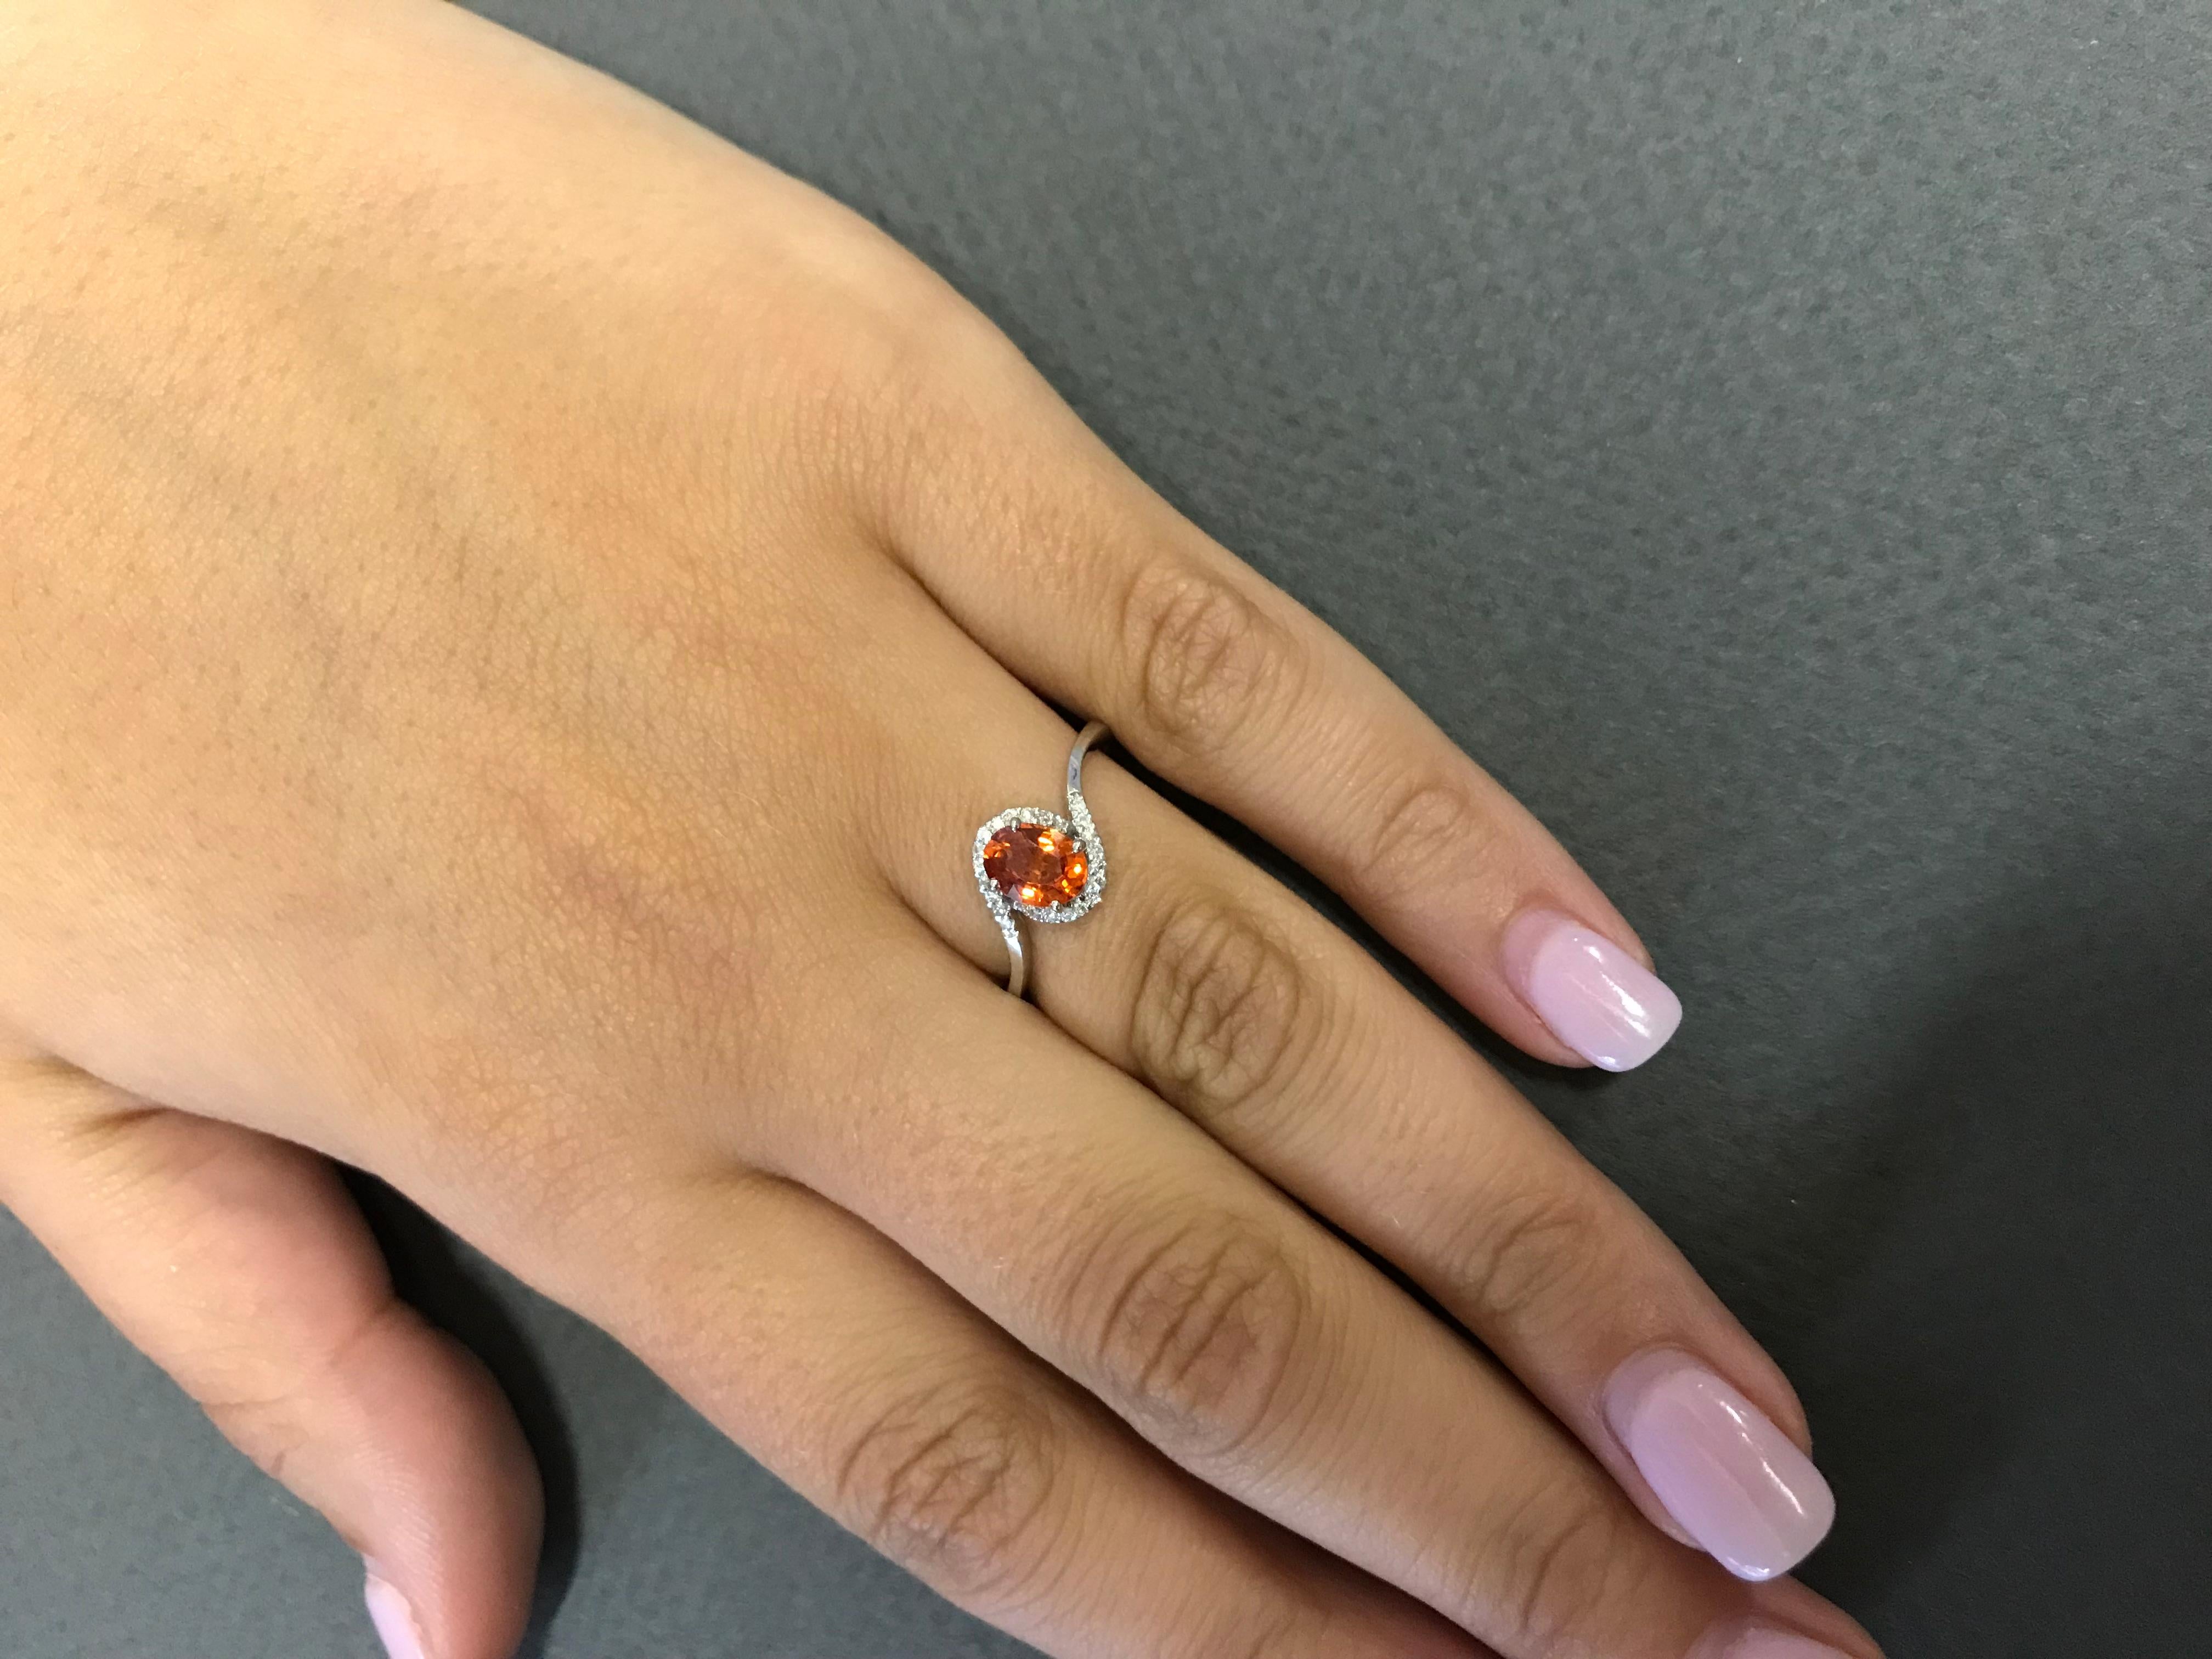 Material: 14k White Gold 
Color Stone Details:  0.95 Carat Oval Cut Orange Sapphire 
Center Stone Details: 24 Brilliant Round White Diamonds at 0.11 Carats Clarity: SI  / Color: H-I
Ring Size: Size 6.75 (can be sized)

Fine one-of-a kind